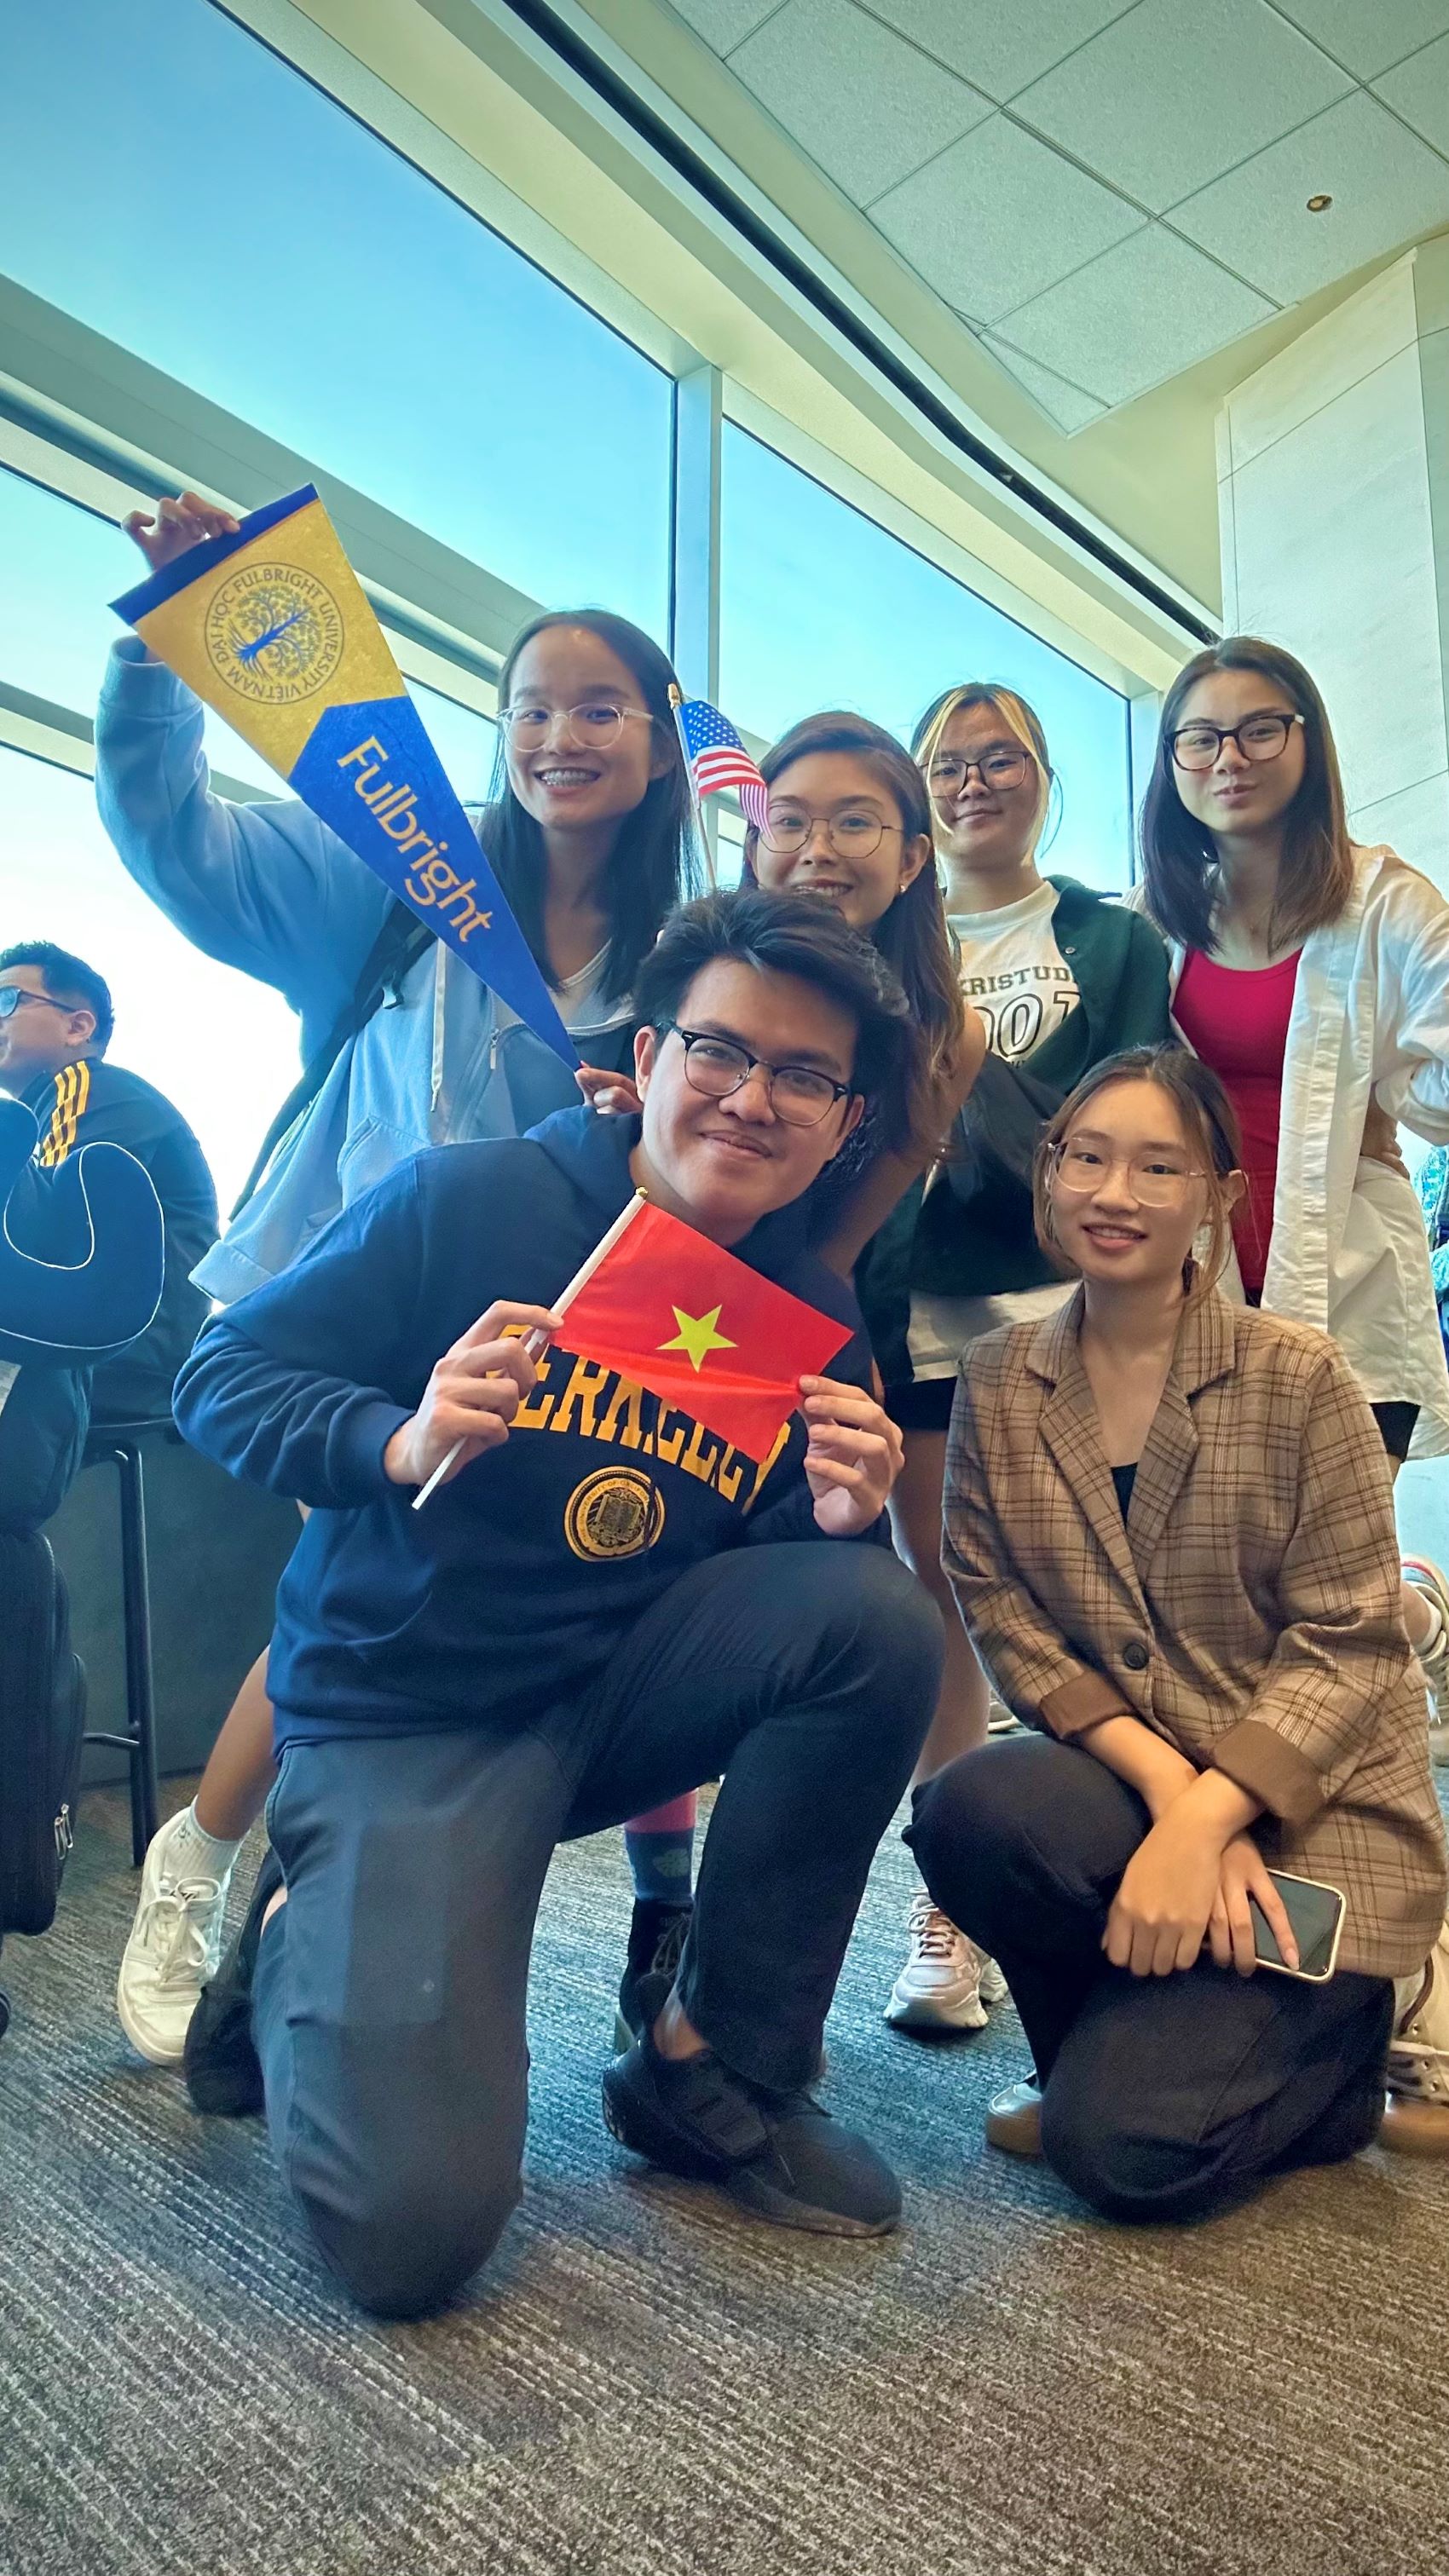 Trung Kien, Class of 2025, majoring in Social Sciences, decided to join SVIC to "understand the factors and methods which had transformed this area into a global hub for innovation and creativity with numerous successful companies."